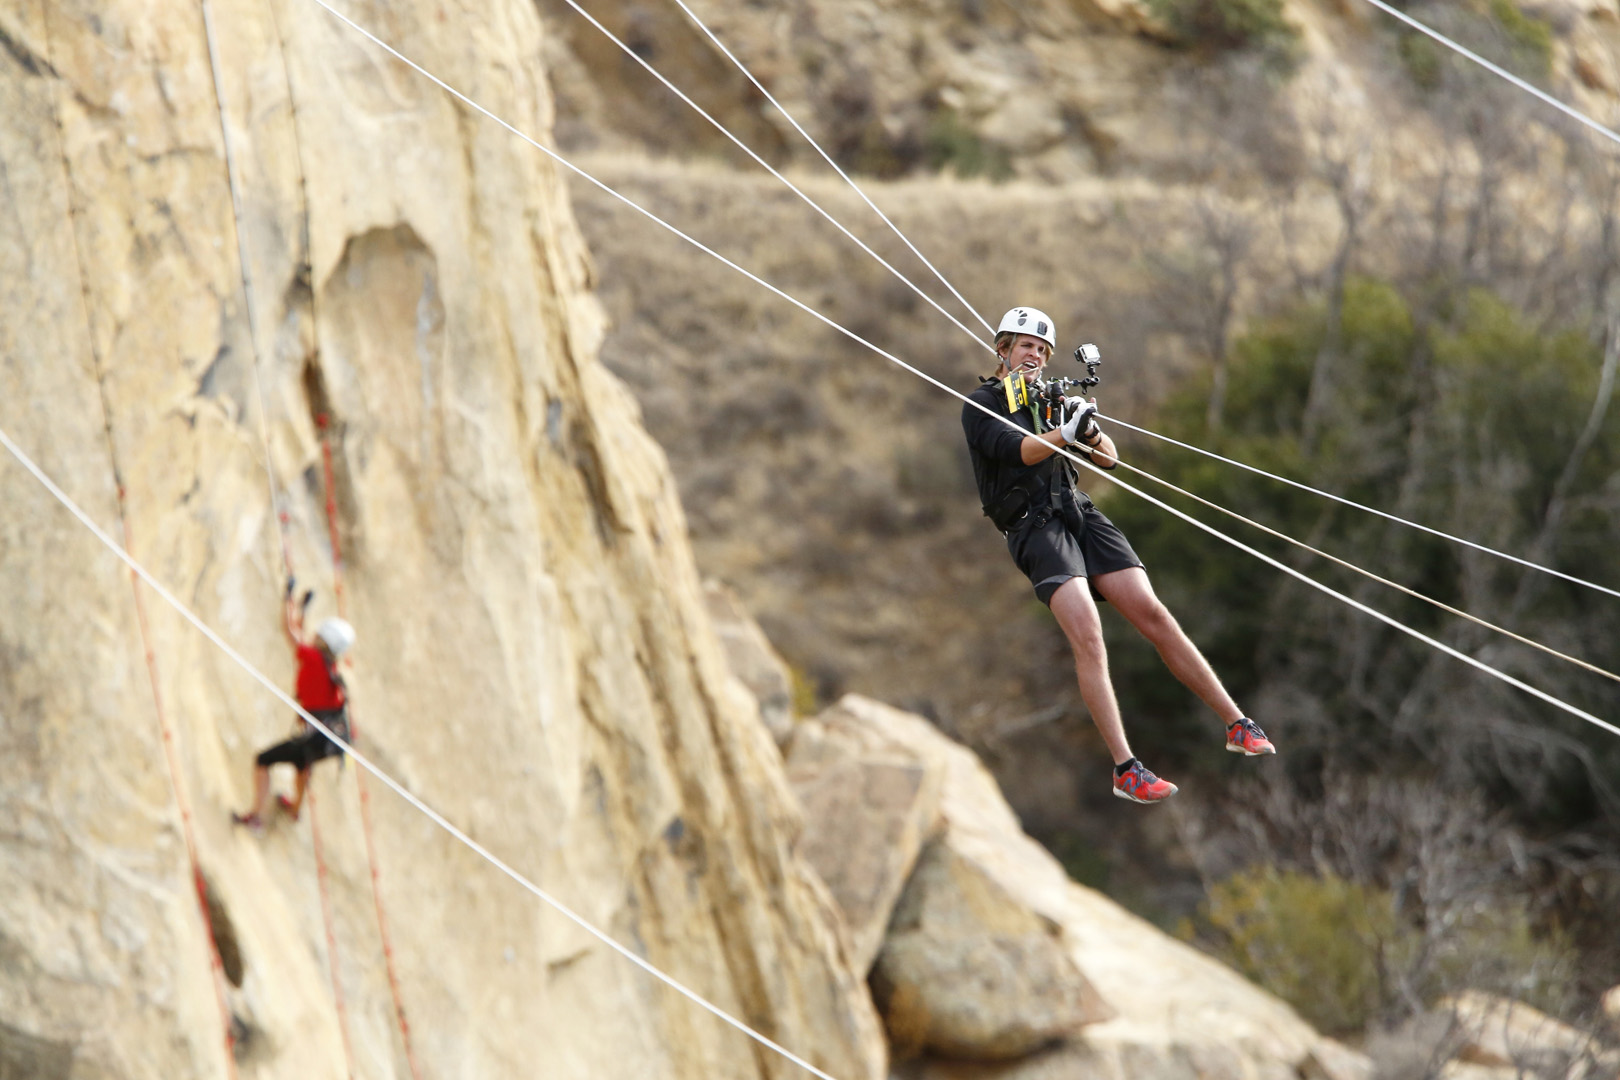 2. Since your high-flying challenges on The Amazing Race, are you both still afraid of heights?